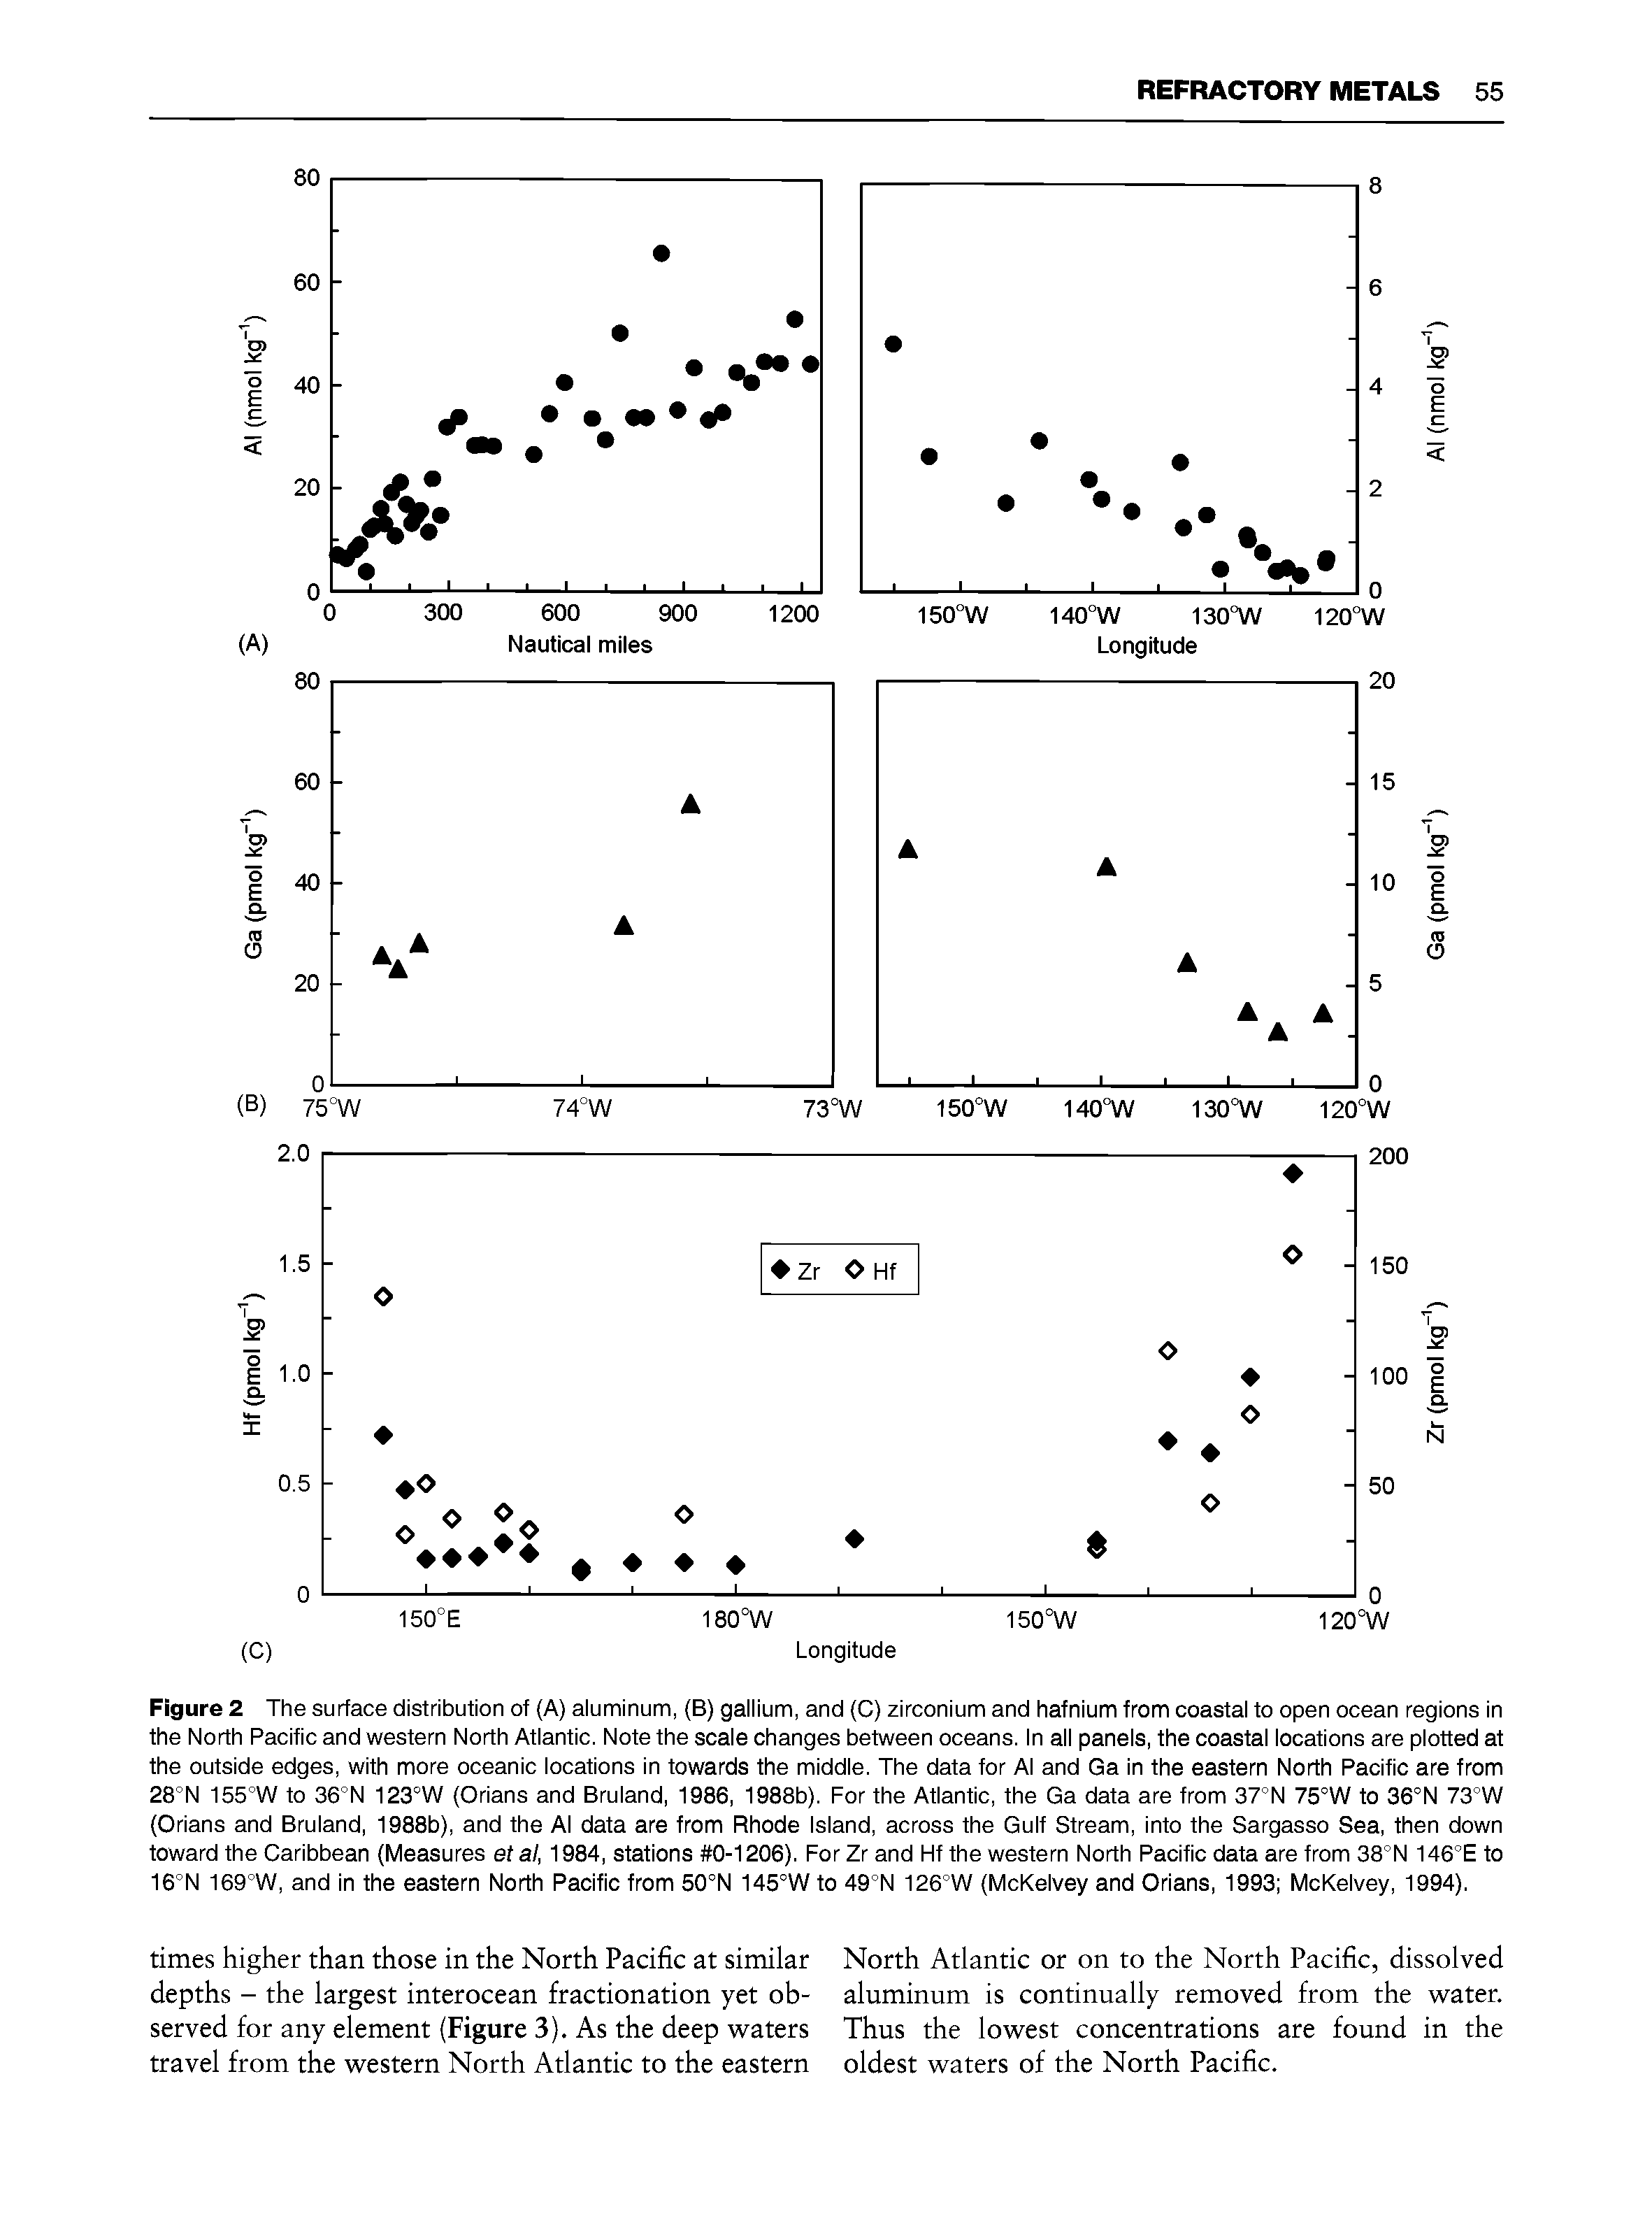 Figure 2 The surface distribution of (A) aluminum, (B) gallium, and (C) zirconium and hafnium from coastal to open ocean regions in the North Pacific and western North Atlantic. Note the scale changes between oceans. In all panels, the coastal locations are plotted at the outside edges, with more oceanic locations in towards the middle. The data for Al and Ga in the eastern North Pacific are from 28°N 155°W to 36°N 123°W (Orians and Bruland, 1986, 1988b). For the Atlantic, the Ga data are from 37°N 75°W to 36°N 73°W (Orians and Bruland, 1988b), and the Al data are from Rhode Island, across the Gulf Stream, into the Sargasso Sea, then down toward the Caribbean (Measures et al, 1984, stations 0-1206). For Zr and FIf the western North Pacific data are from 38°N 146°E to 16°N 169°W, and in the eastern North Pacific from 50°N 145°W to 49°N 126°W (McKelvey and Orians, 1993 McKelvey, 1994).